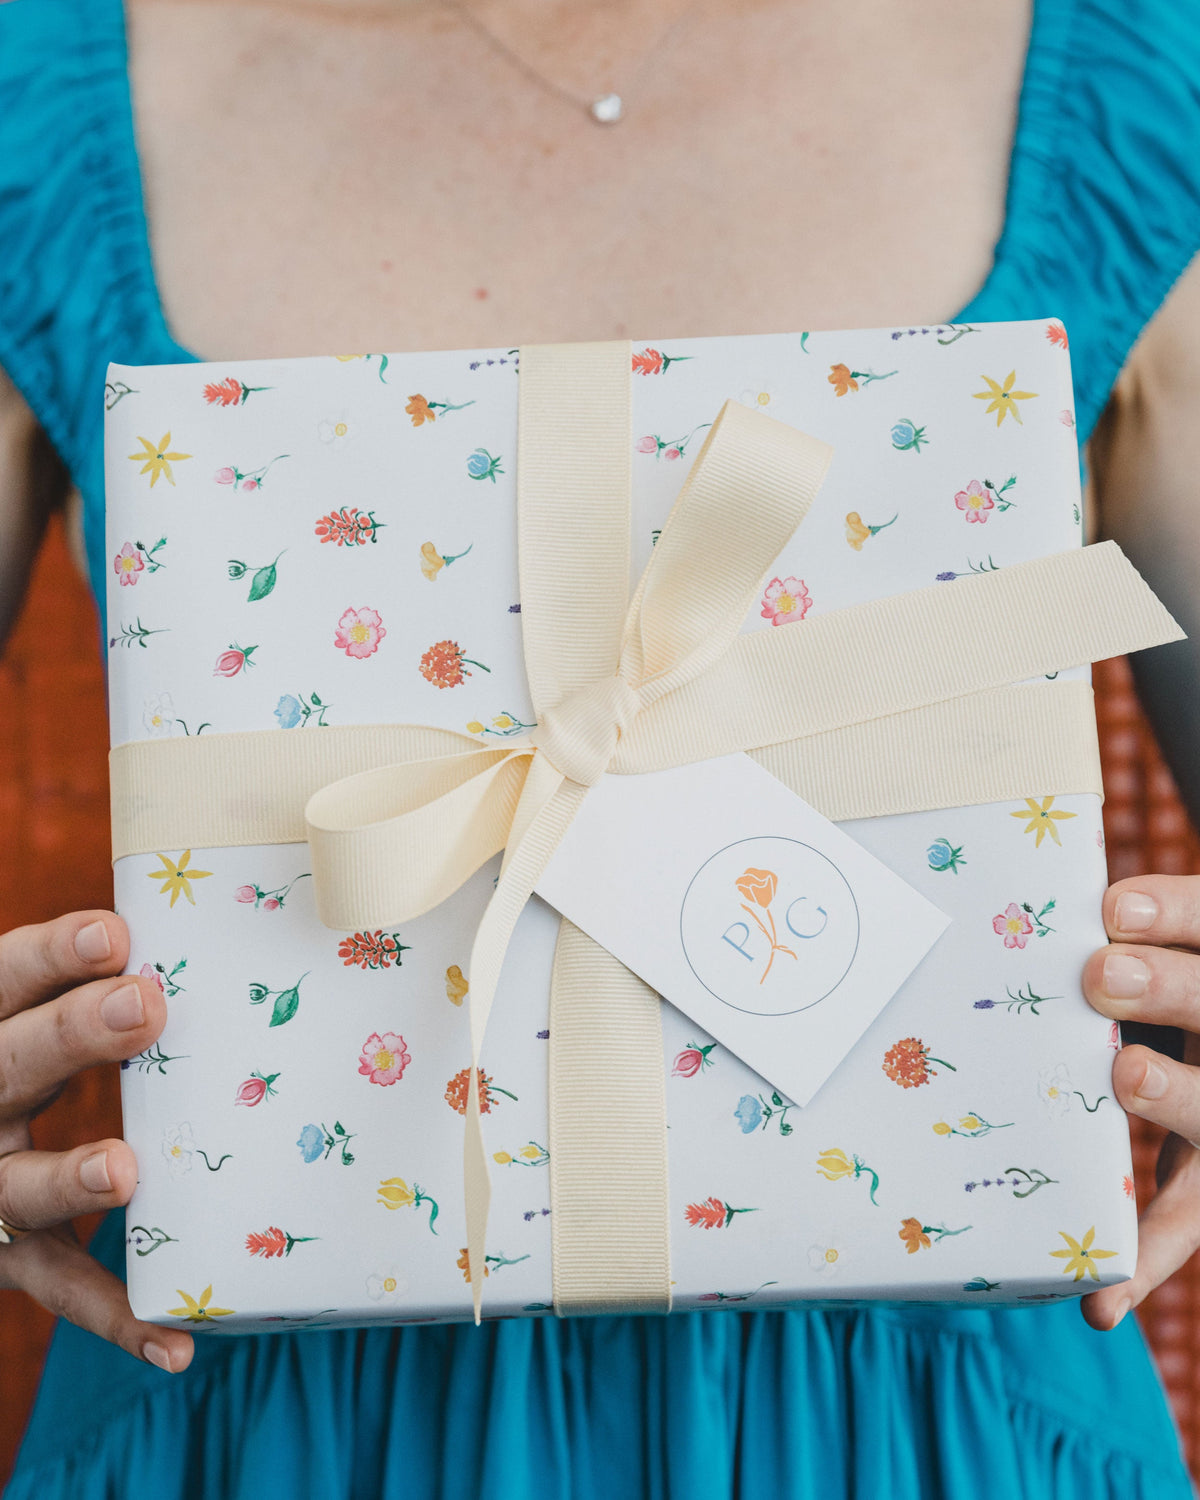 The Gifting Service